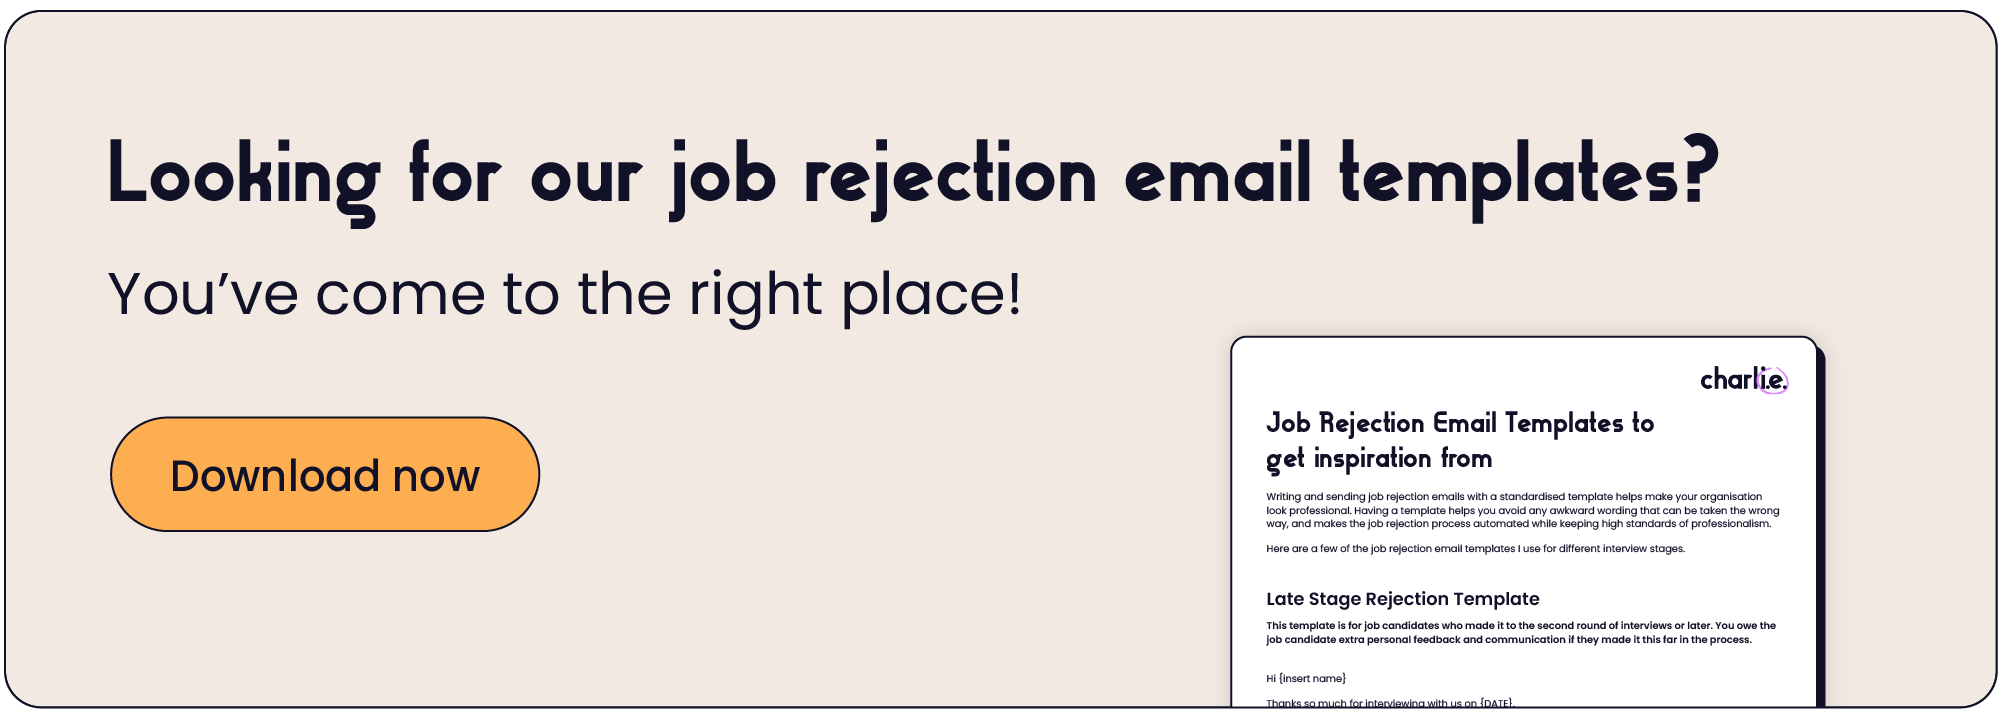 How to write a job rejection email with tact + templates